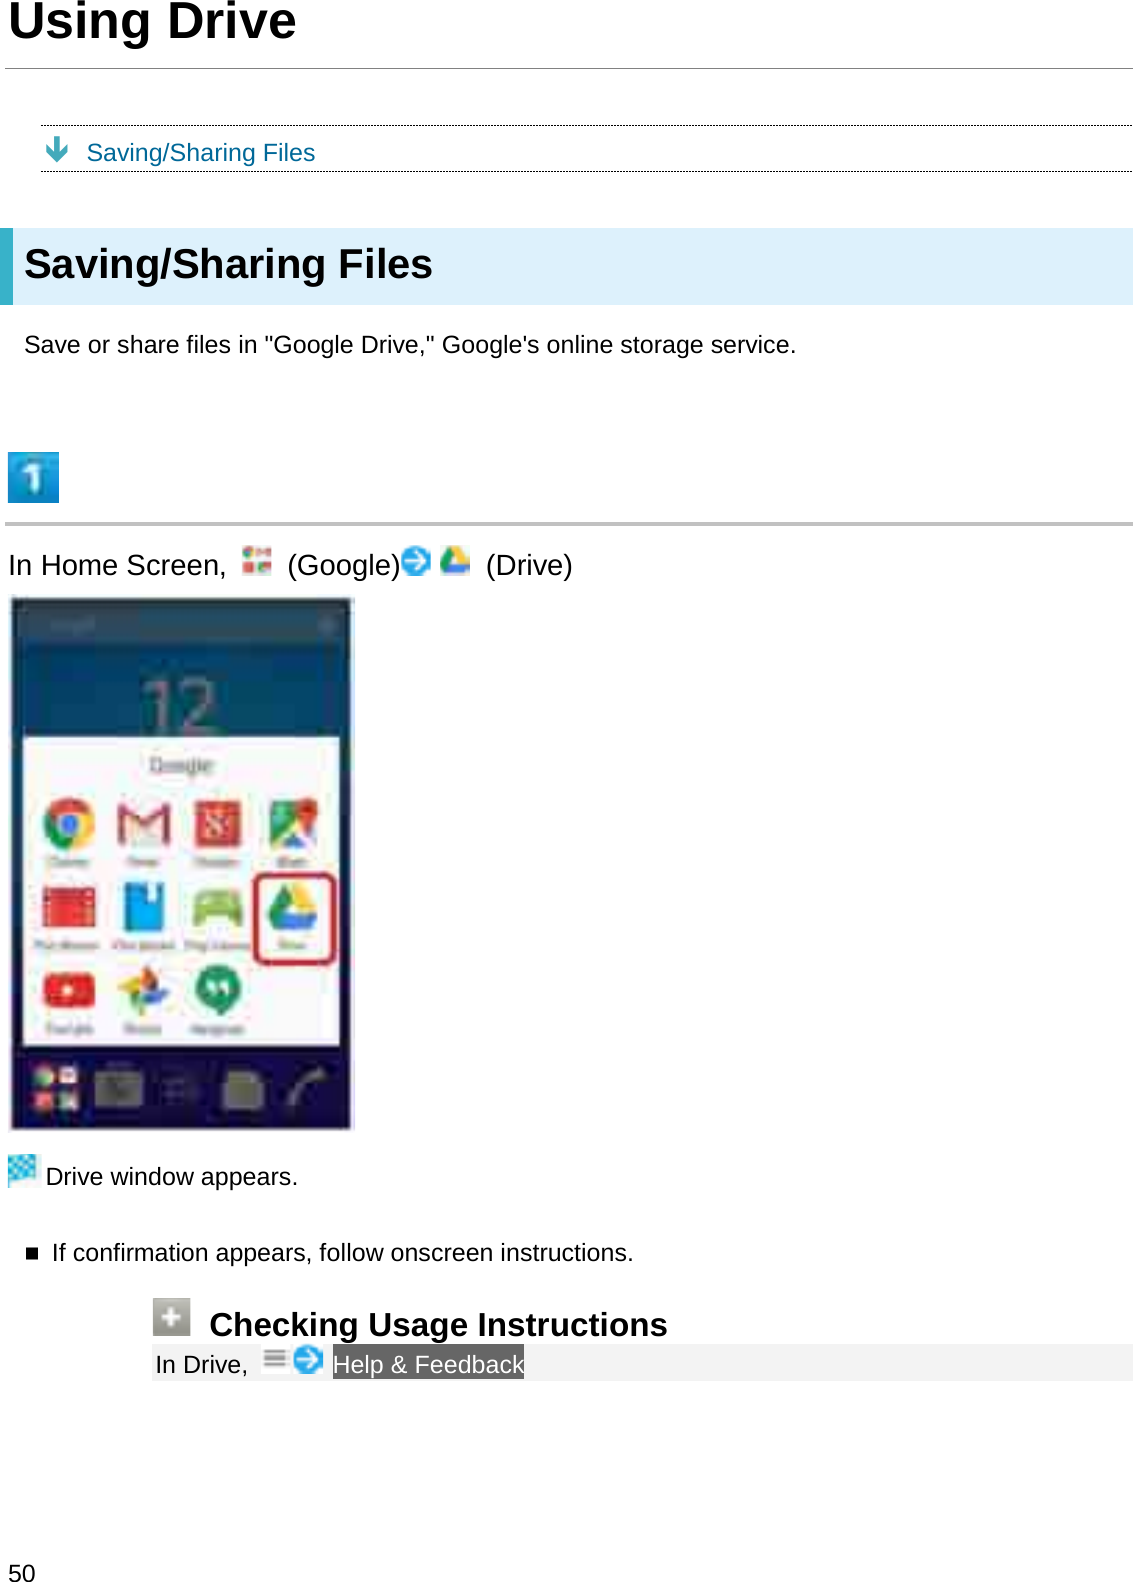 Using DriveÐSaving/Sharing FilesSaving/Sharing FilesSave or share files in &quot;Google Drive,&quot; Google&apos;s online storage service.In Home Screen,  (Google) (Drive)Drive window appears.If confirmation appears, follow onscreen instructions.Checking Usage InstructionsIn Drive,  Help &amp; Feedback50